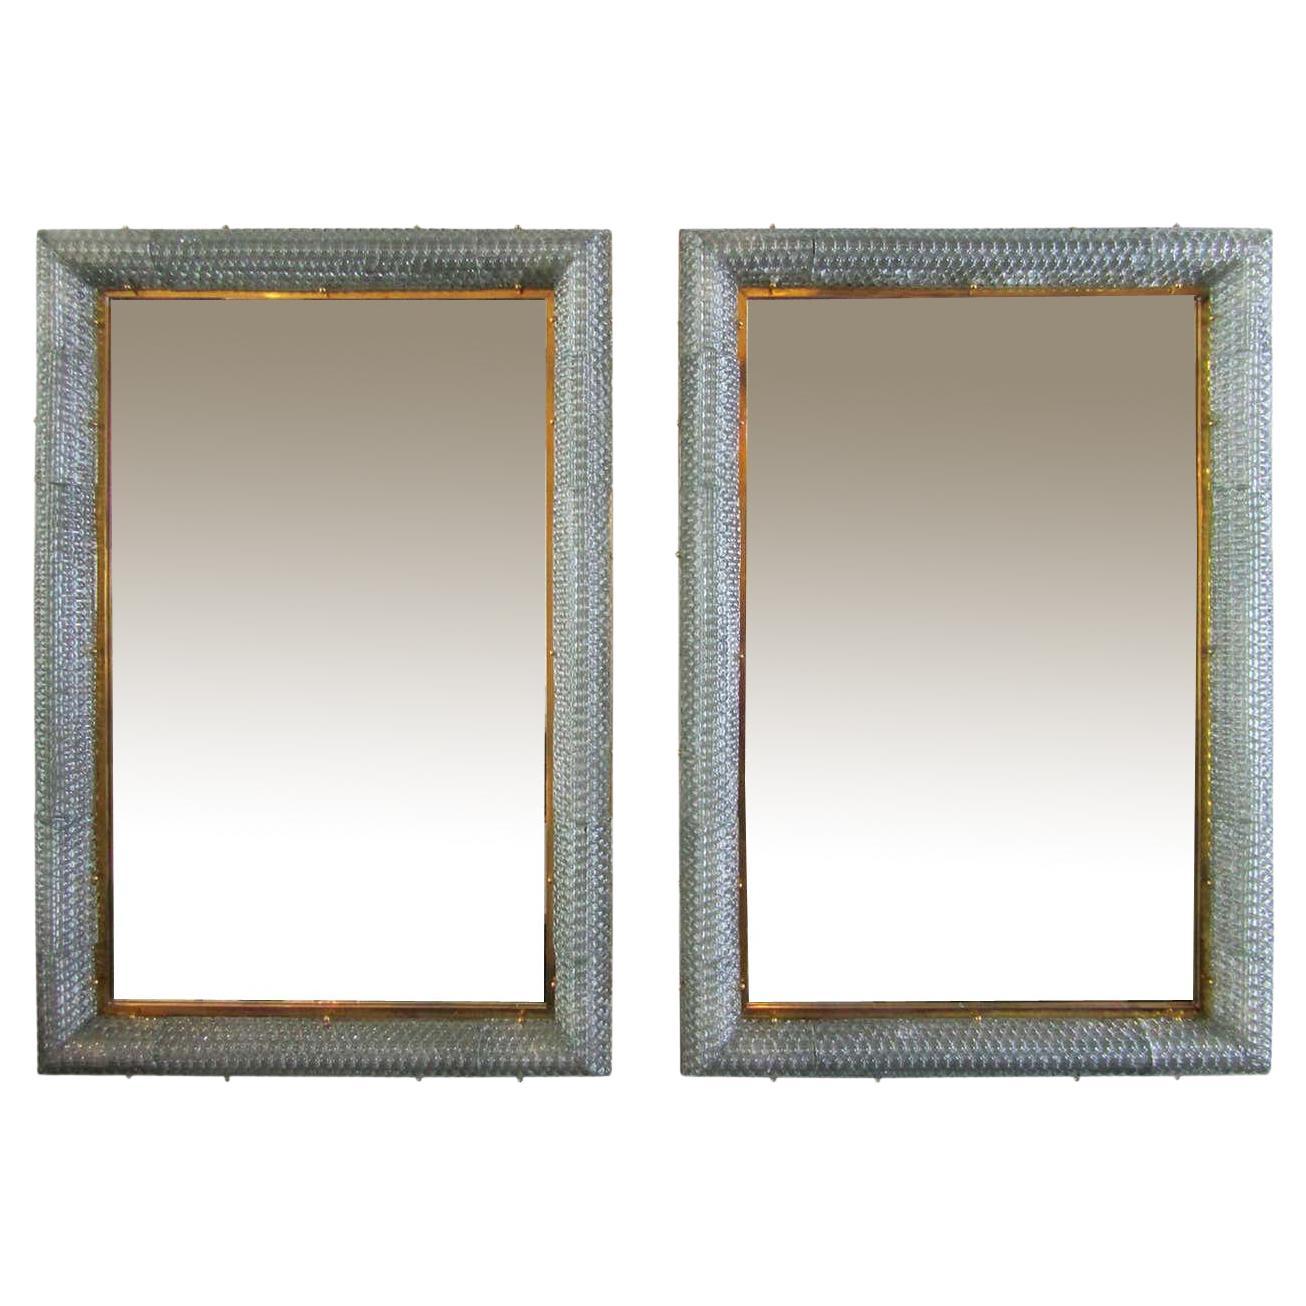 Unusual Pair Of Illuminated Mirrors With Etched Glass At 1stdibs